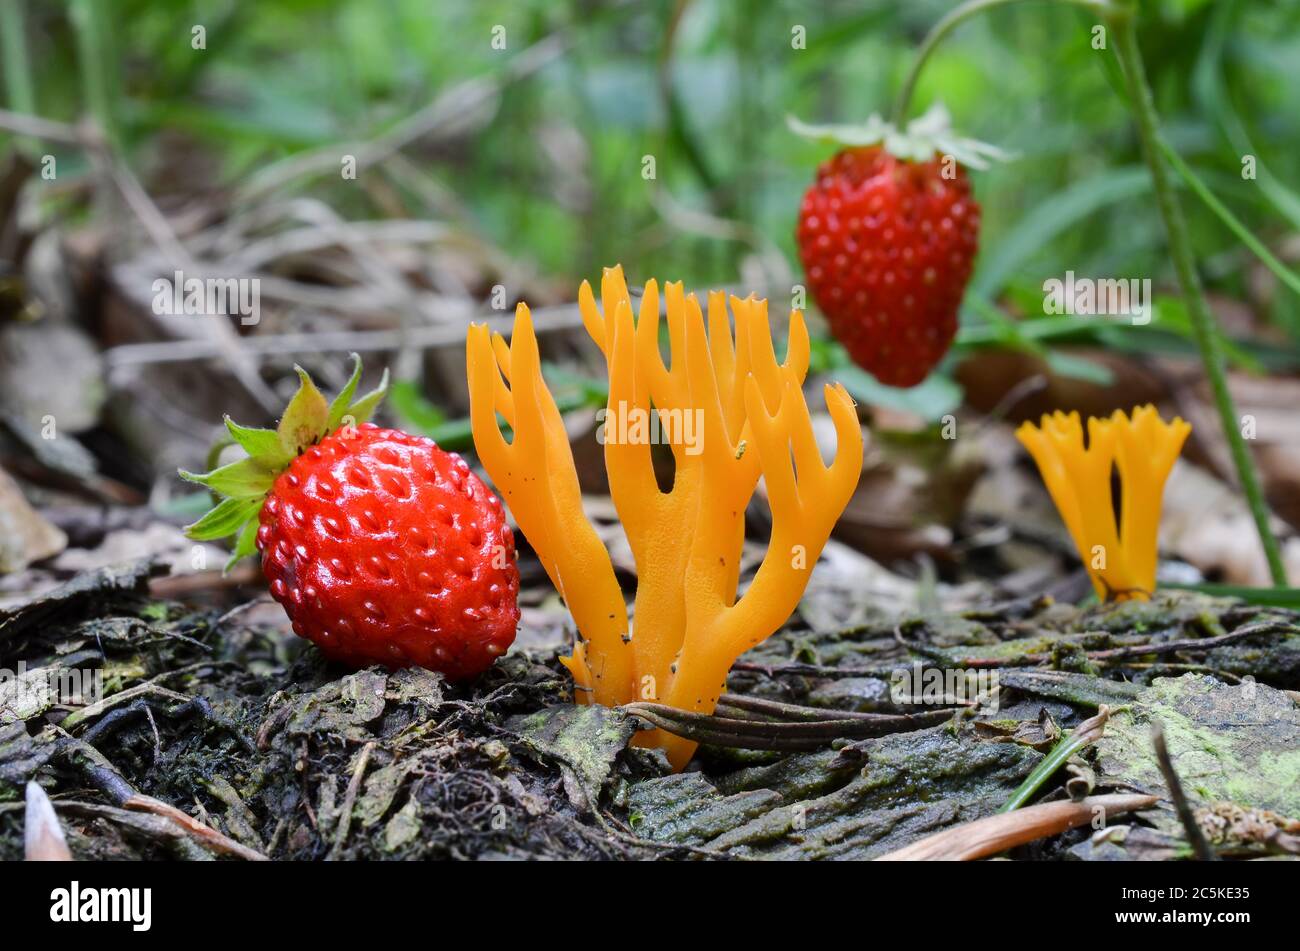 Calocera viscosa or Yellow Stagshorn mushroom in natural habitat, in the company of wild, ripe strawberries Stock Photo